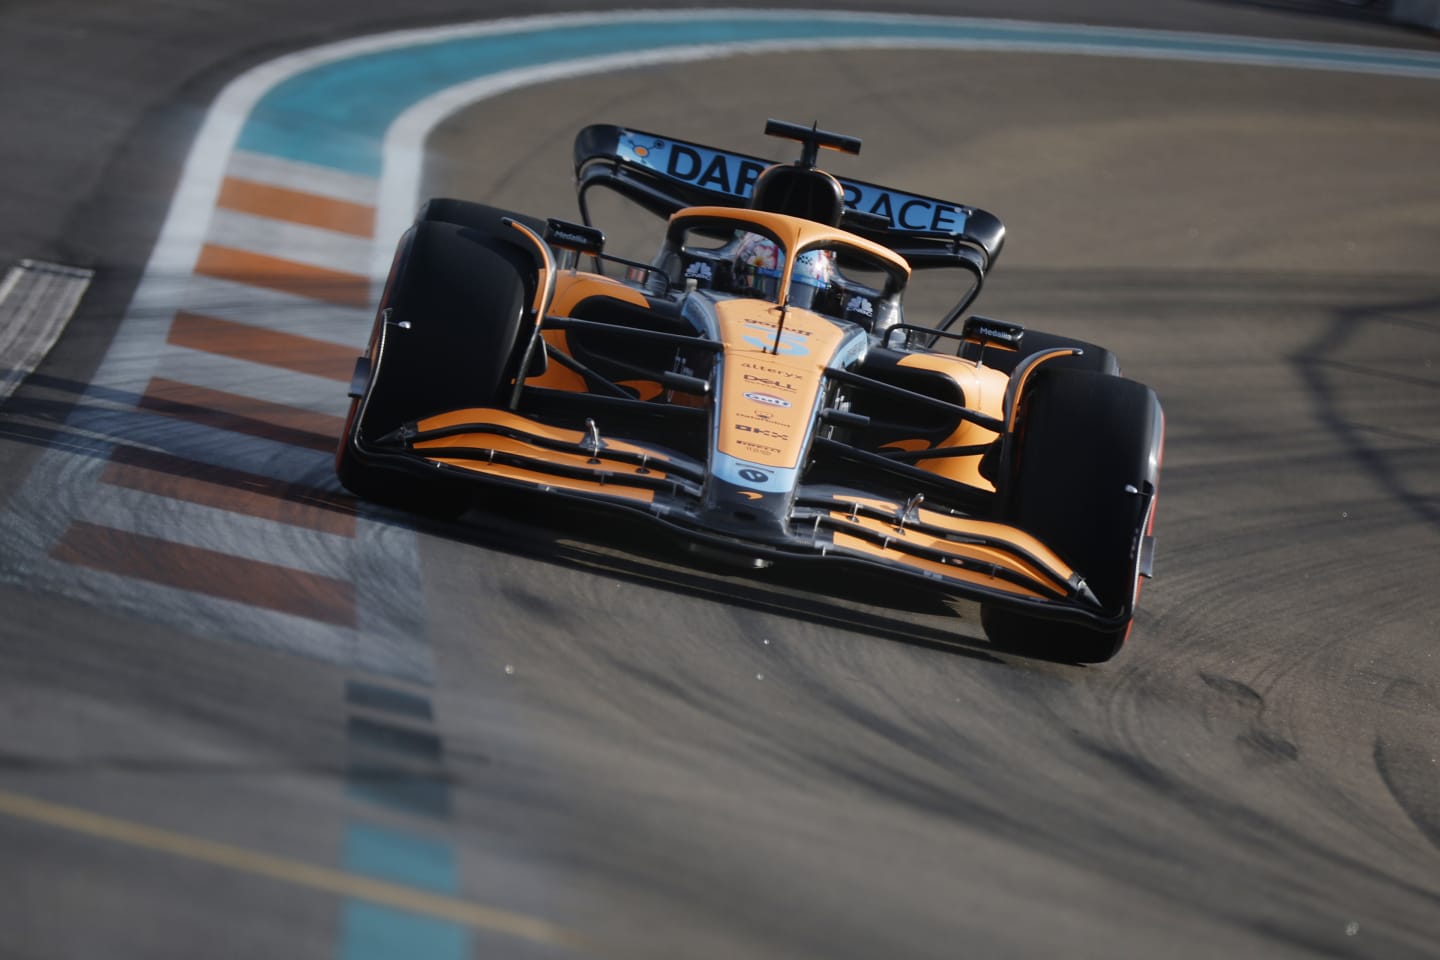 MIAMI, FLORIDA - MAY 06: Daniel Ricciardo of Australia driving the (3) McLaren MCL36 Mercedes on track during practice ahead of the F1 Grand Prix of Miami at the Miami International Autodrome on May 06, 2022 in Miami, Florida. (Photo by Chris Graythen/Getty Images)